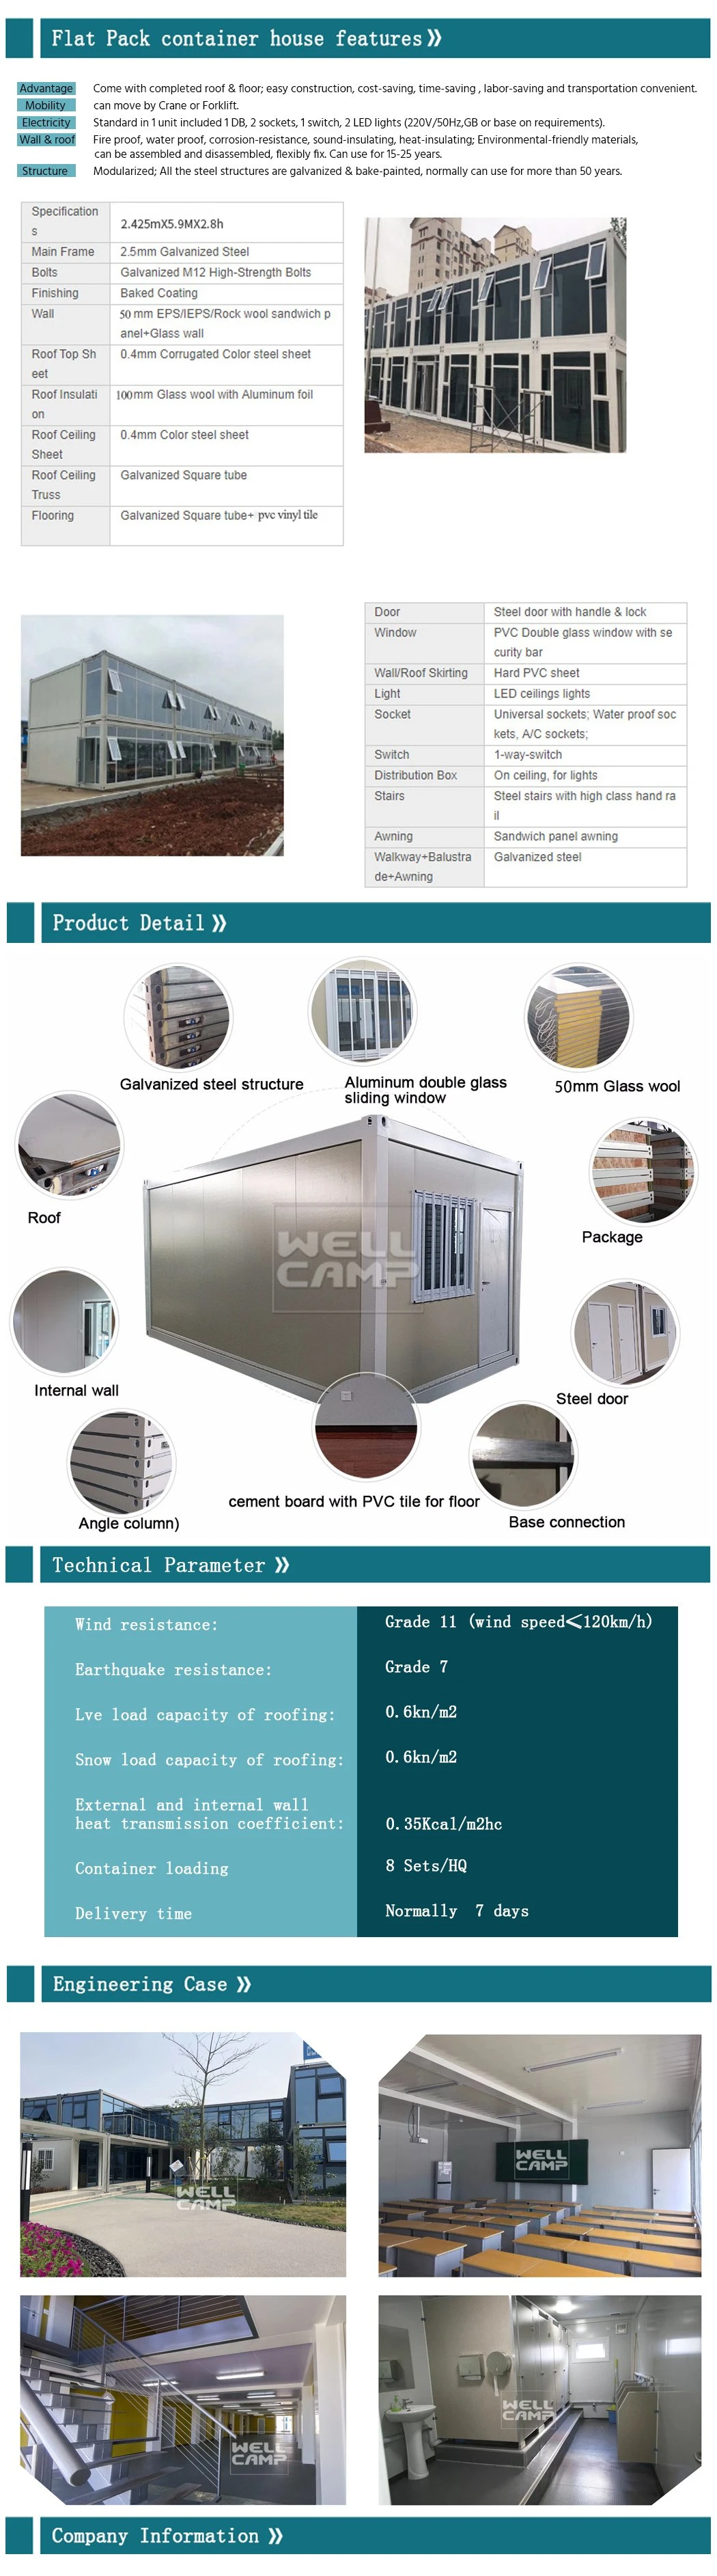 Prefab Design Prefabricated Fast Install Modern Modular Container Building Steel Structure Container Building Apartment School Hotel